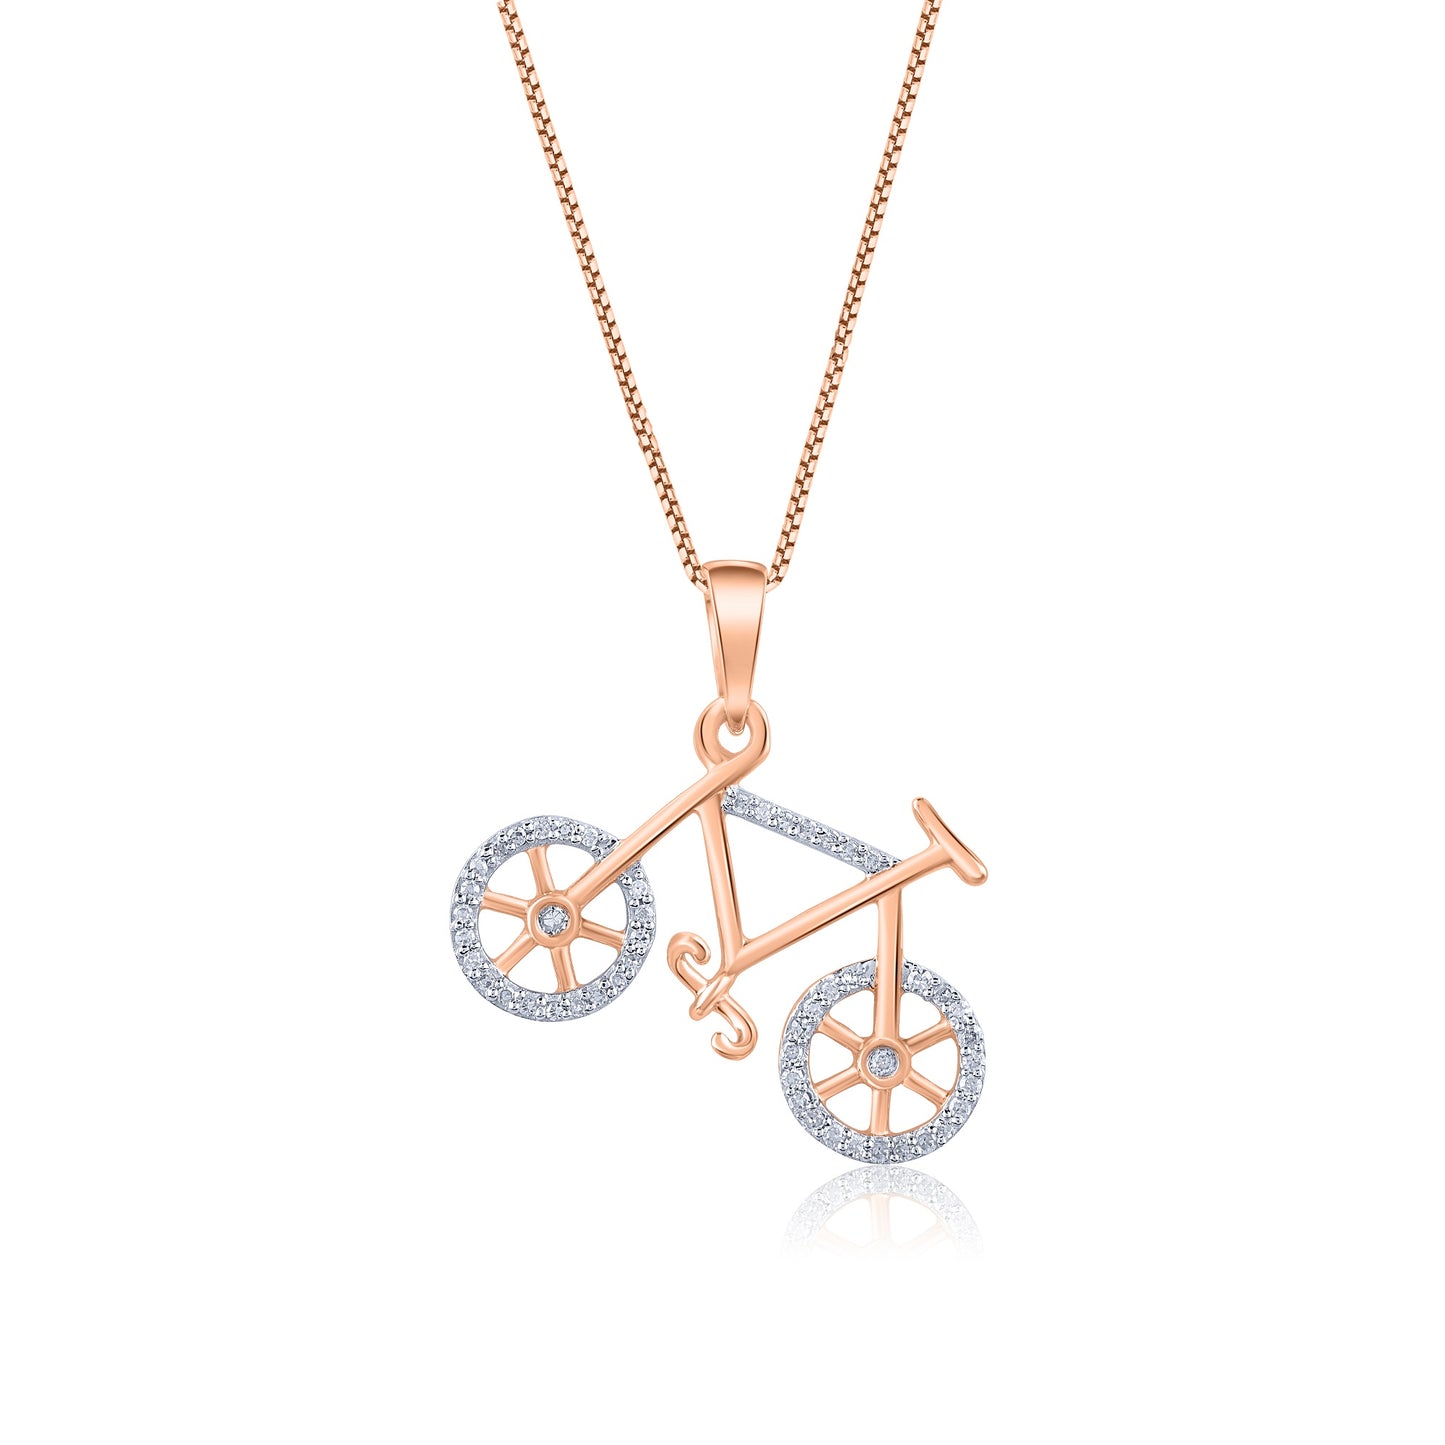 Bicycle Pendant Necklace in 10K Gold